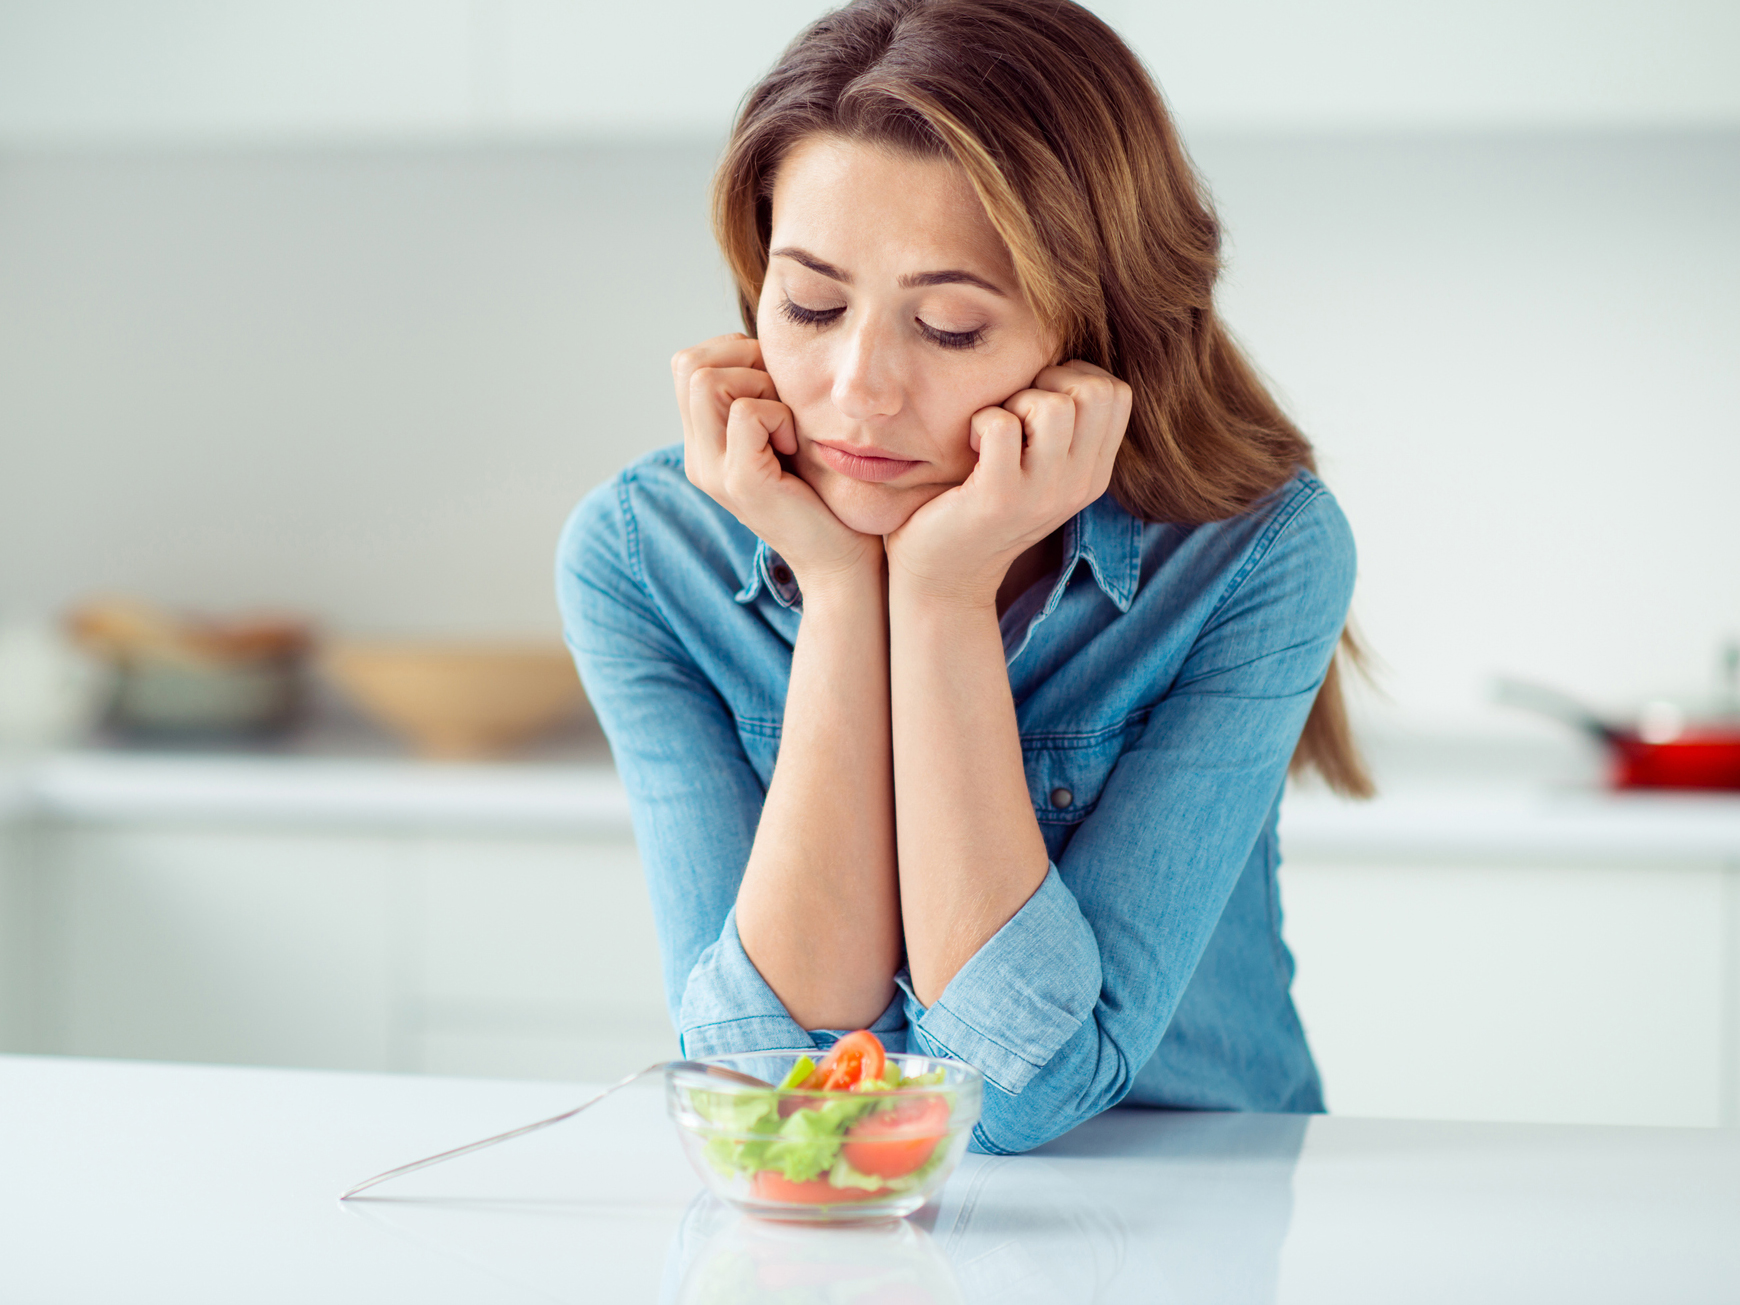 8 warning signs you’ve taken healthy eating too far